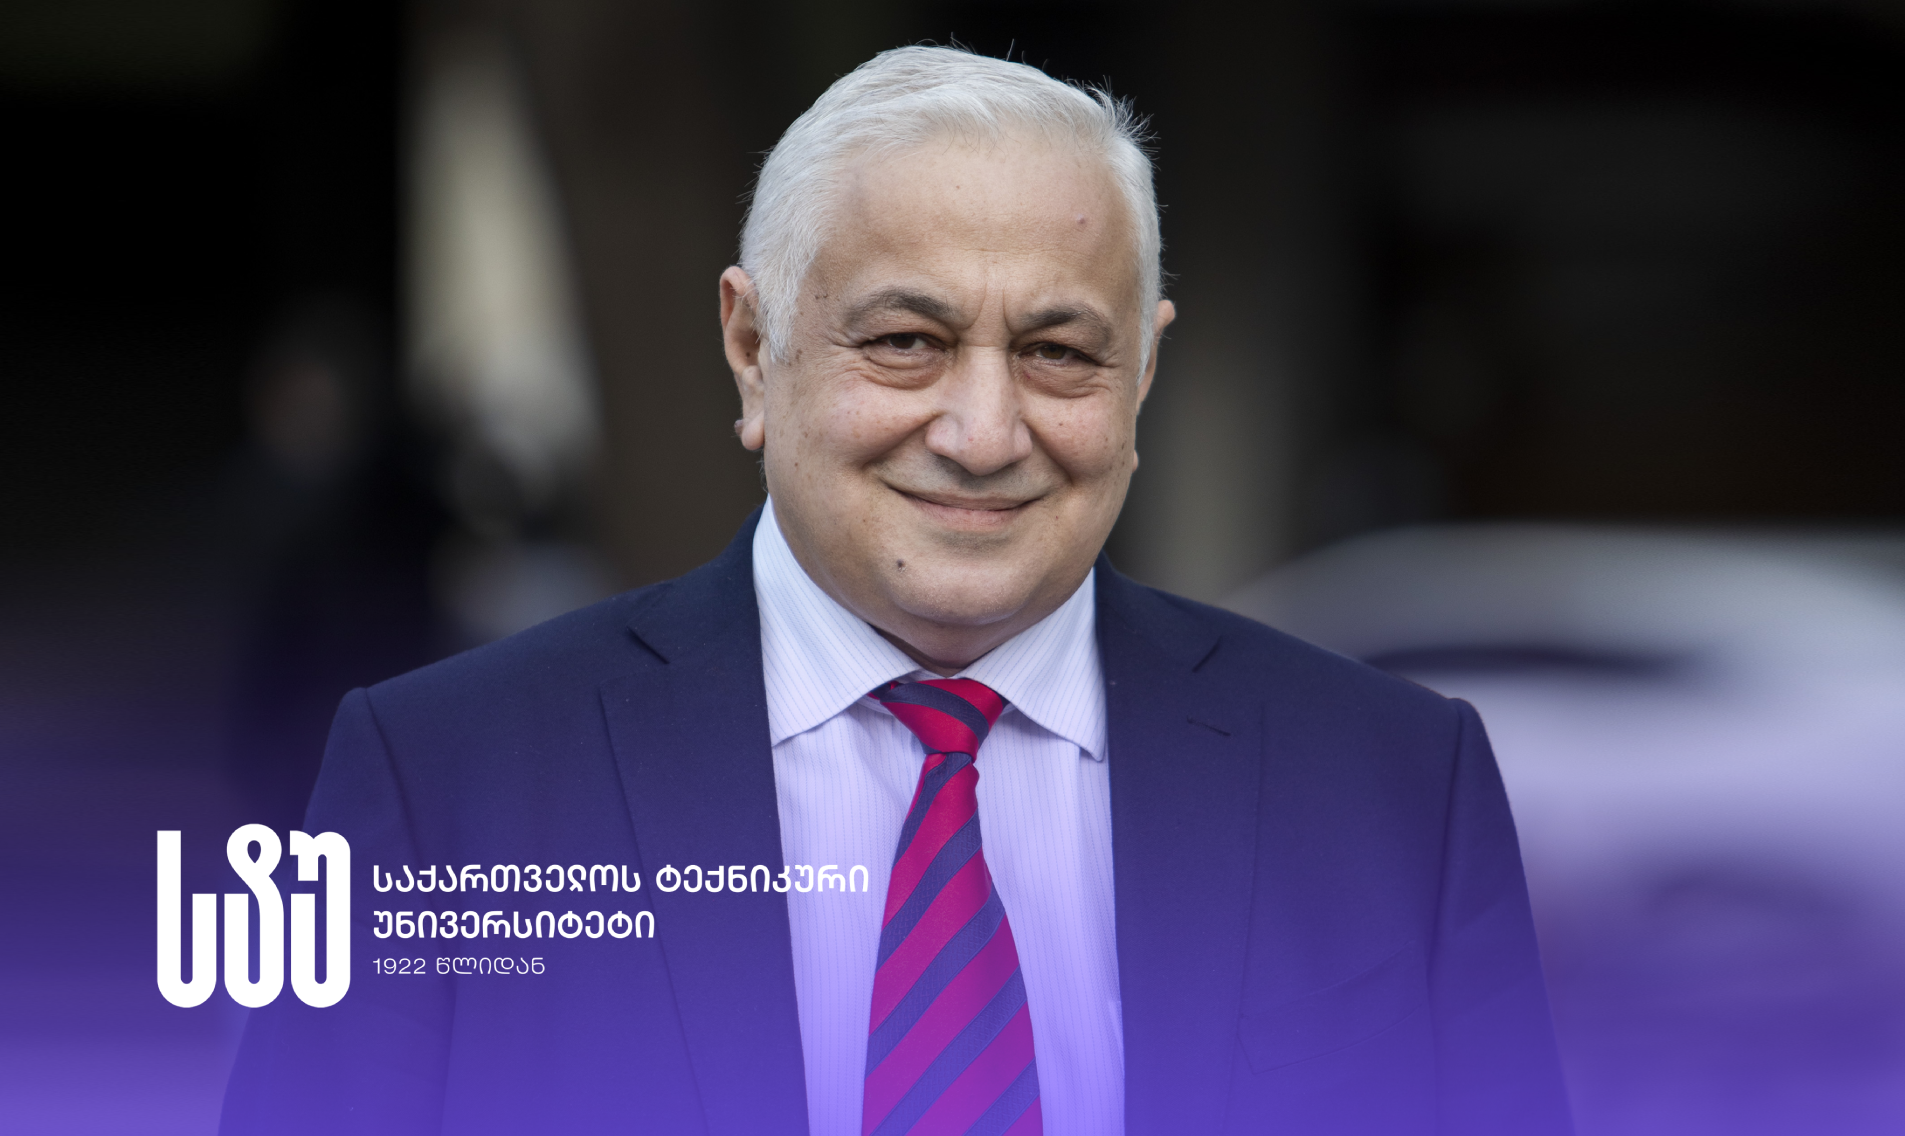 The Rector of GTU congratulates students, teachers, and citizens of Georgia on Independence Day